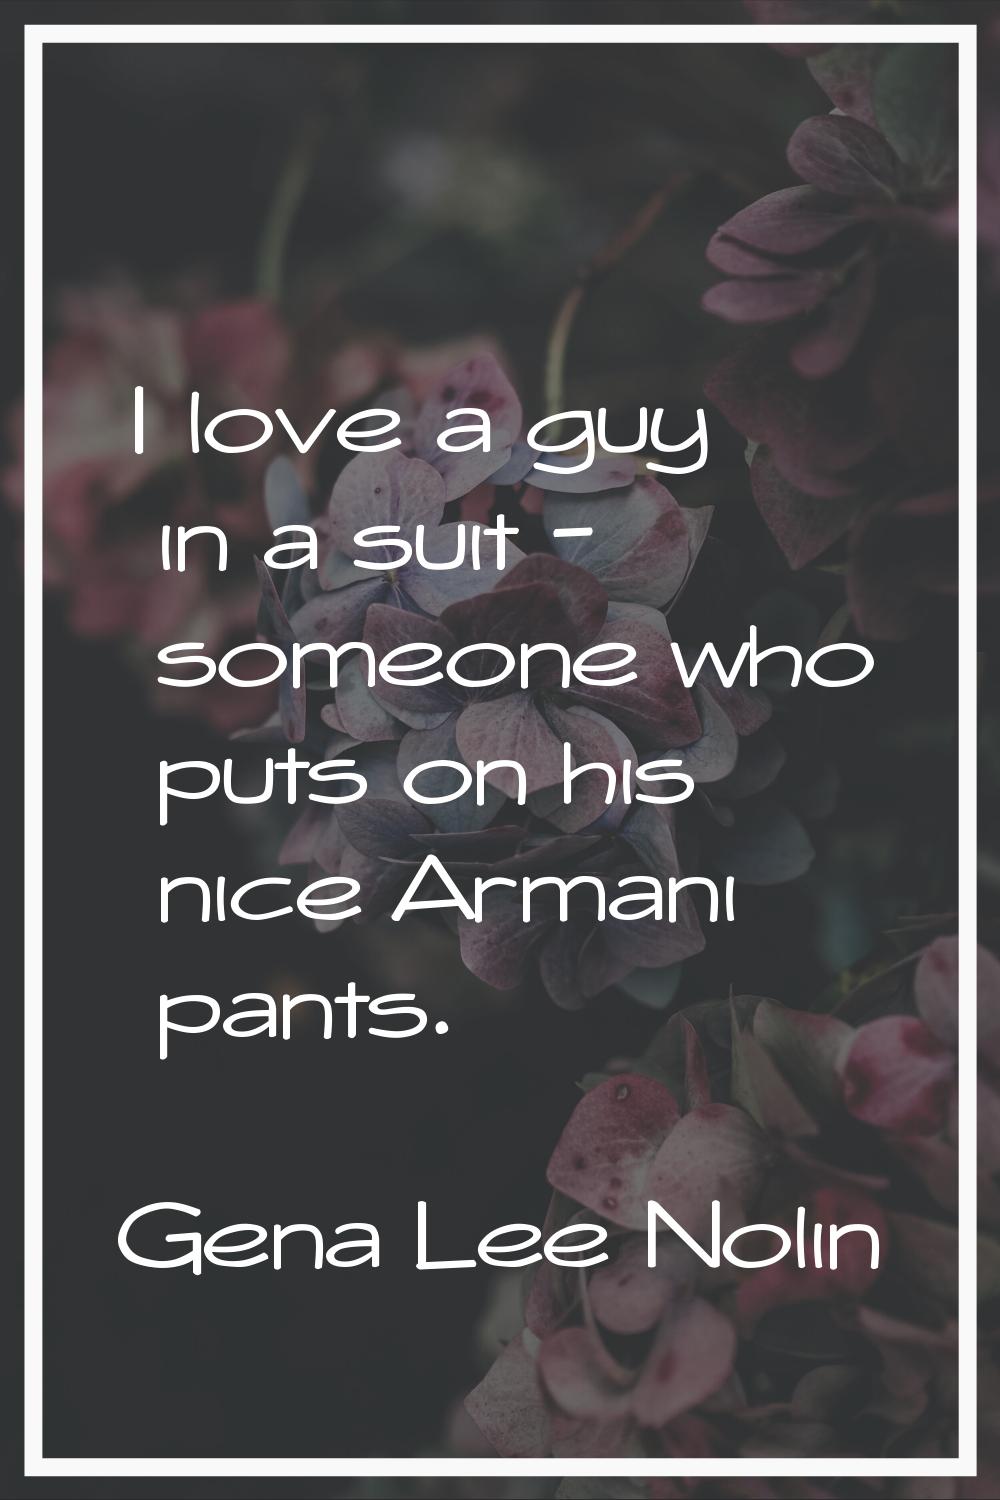 I love a guy in a suit - someone who puts on his nice Armani pants.